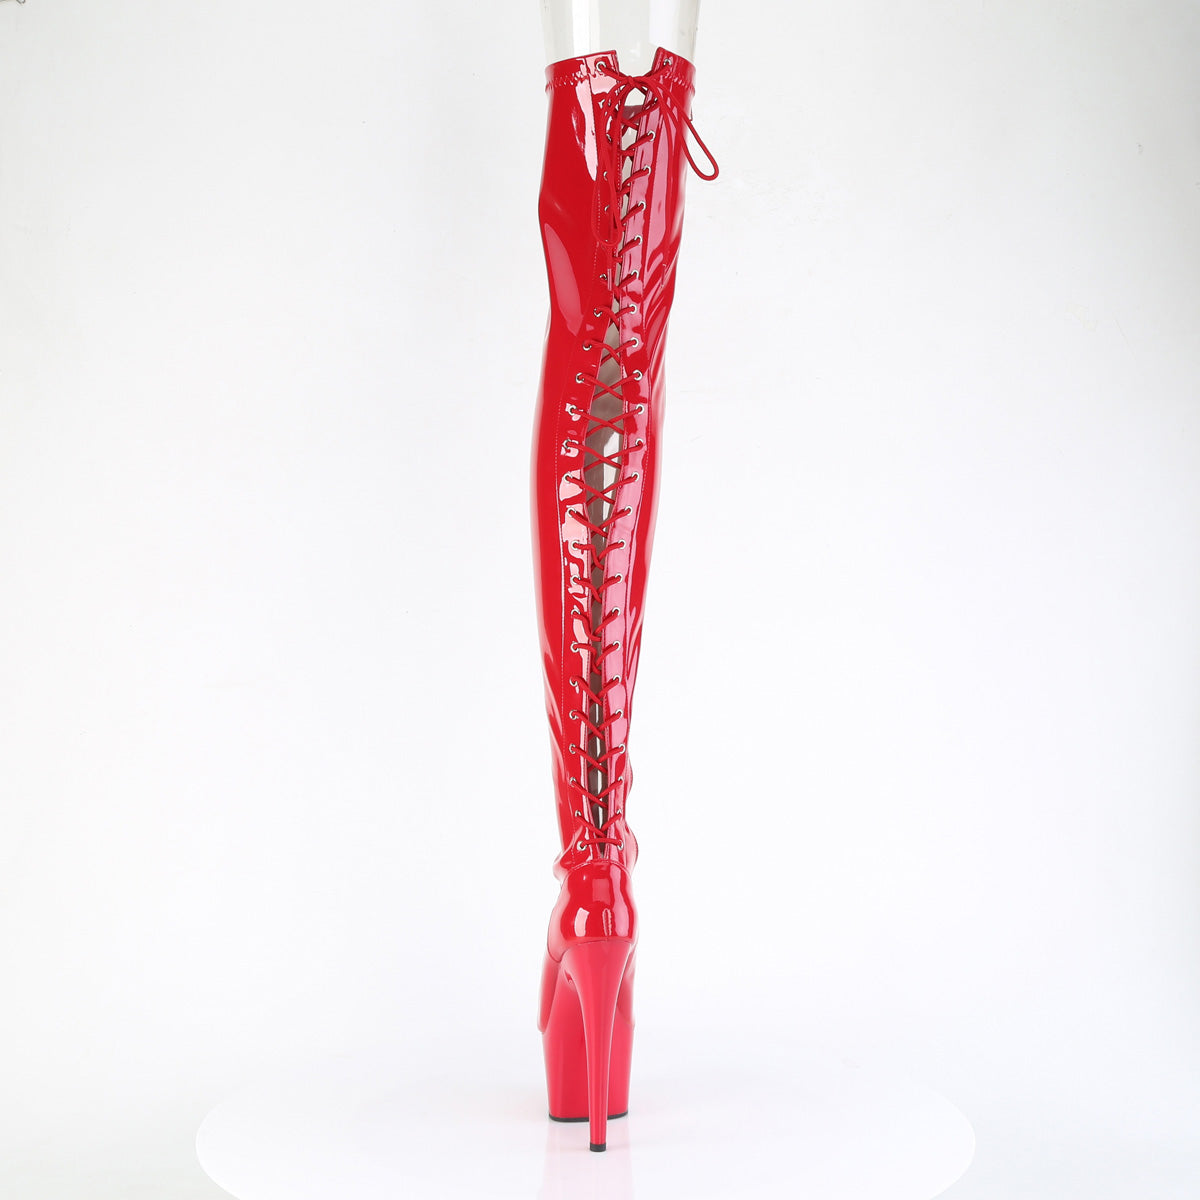 ADORE-3850 Pleaser Red Patent Pole Dancing Kinky Thigh High Boots